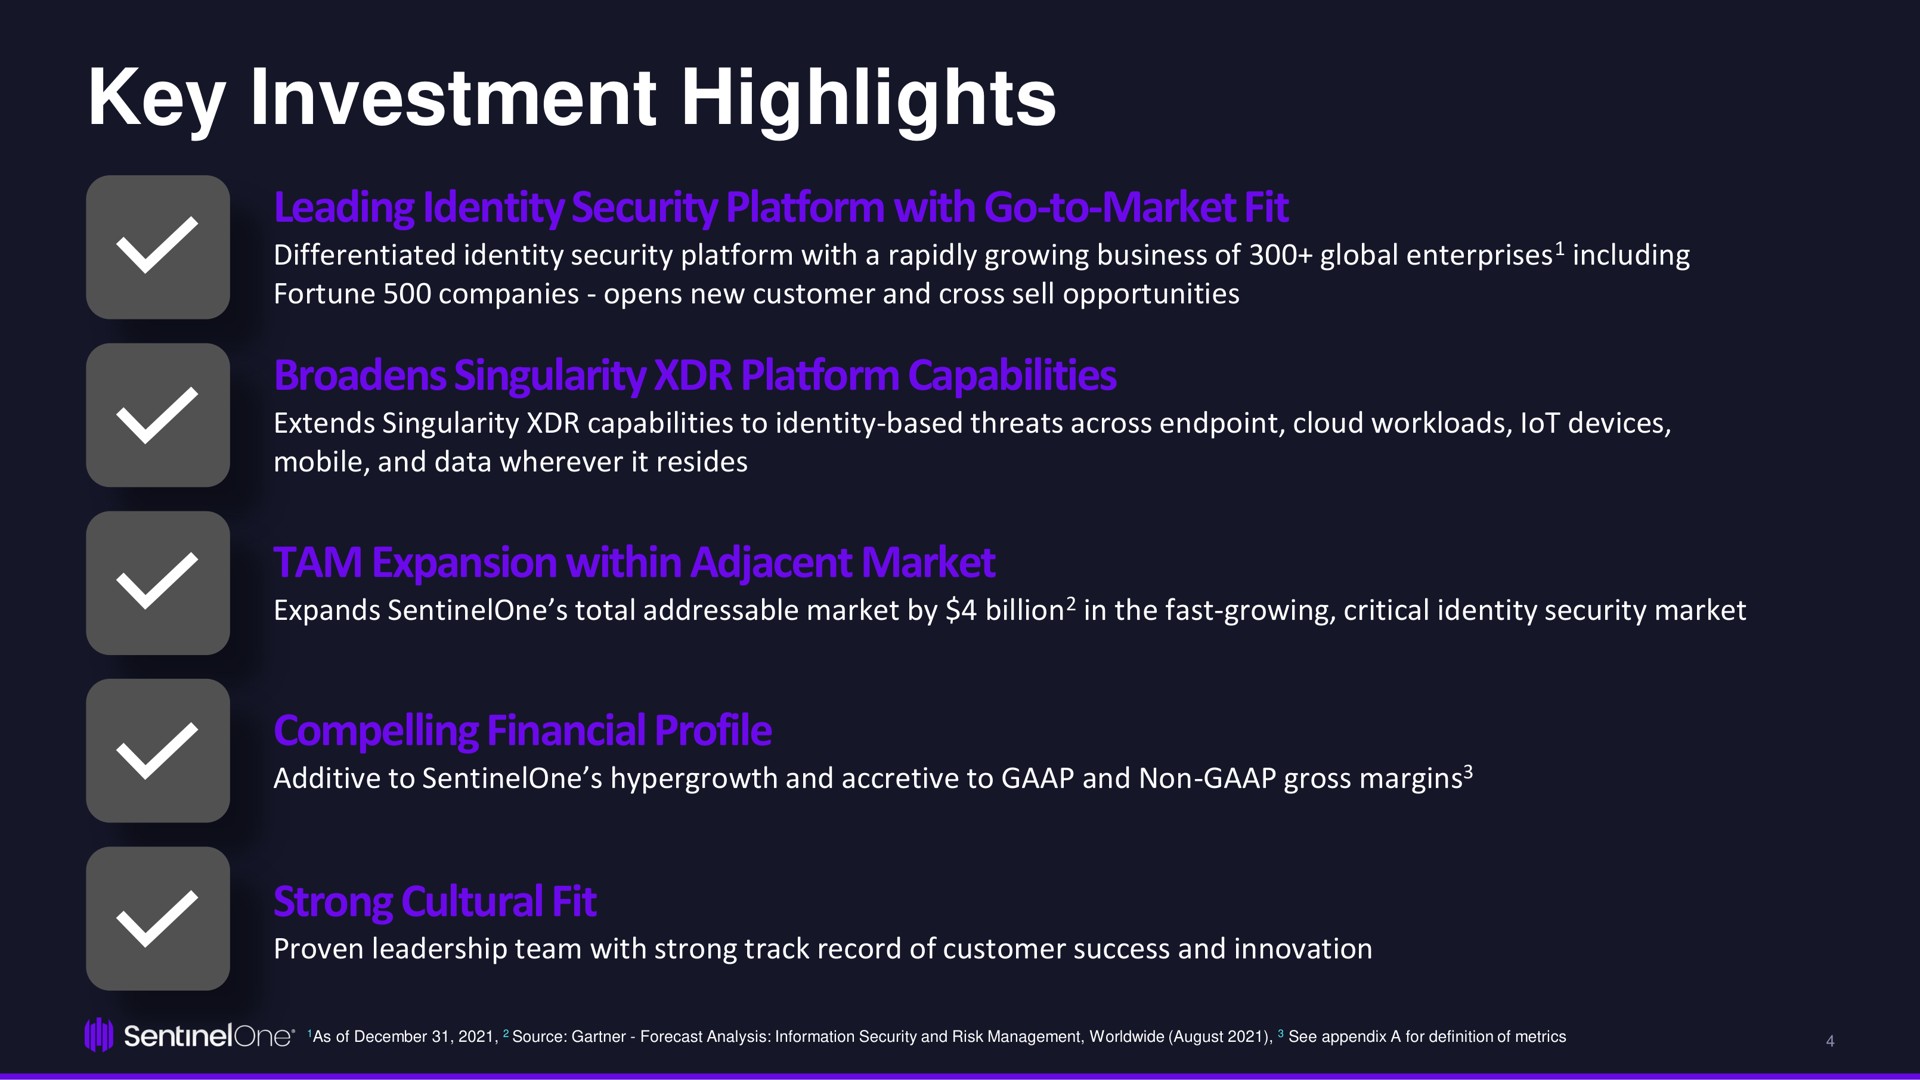 key investment highlights leading identity security platform with go to market fit broadens singularity platform capabilities tam expansion within adjacent market compelling financial profile strong cultural fit a | SentinelOne